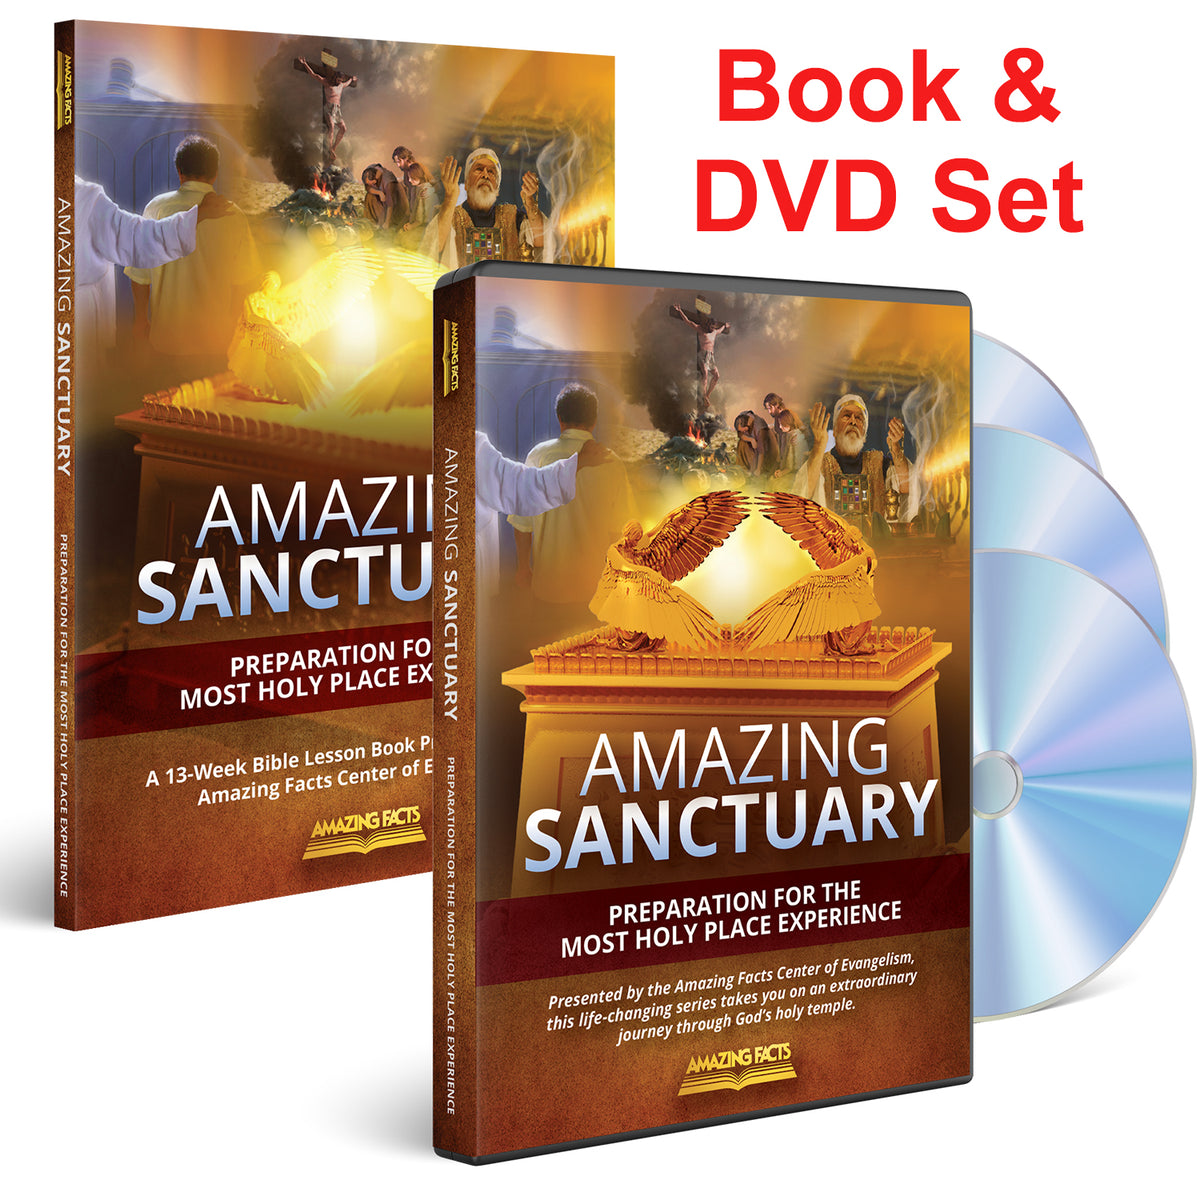 Amazing Sanctuary DVD & Book Set by Amazing Facts